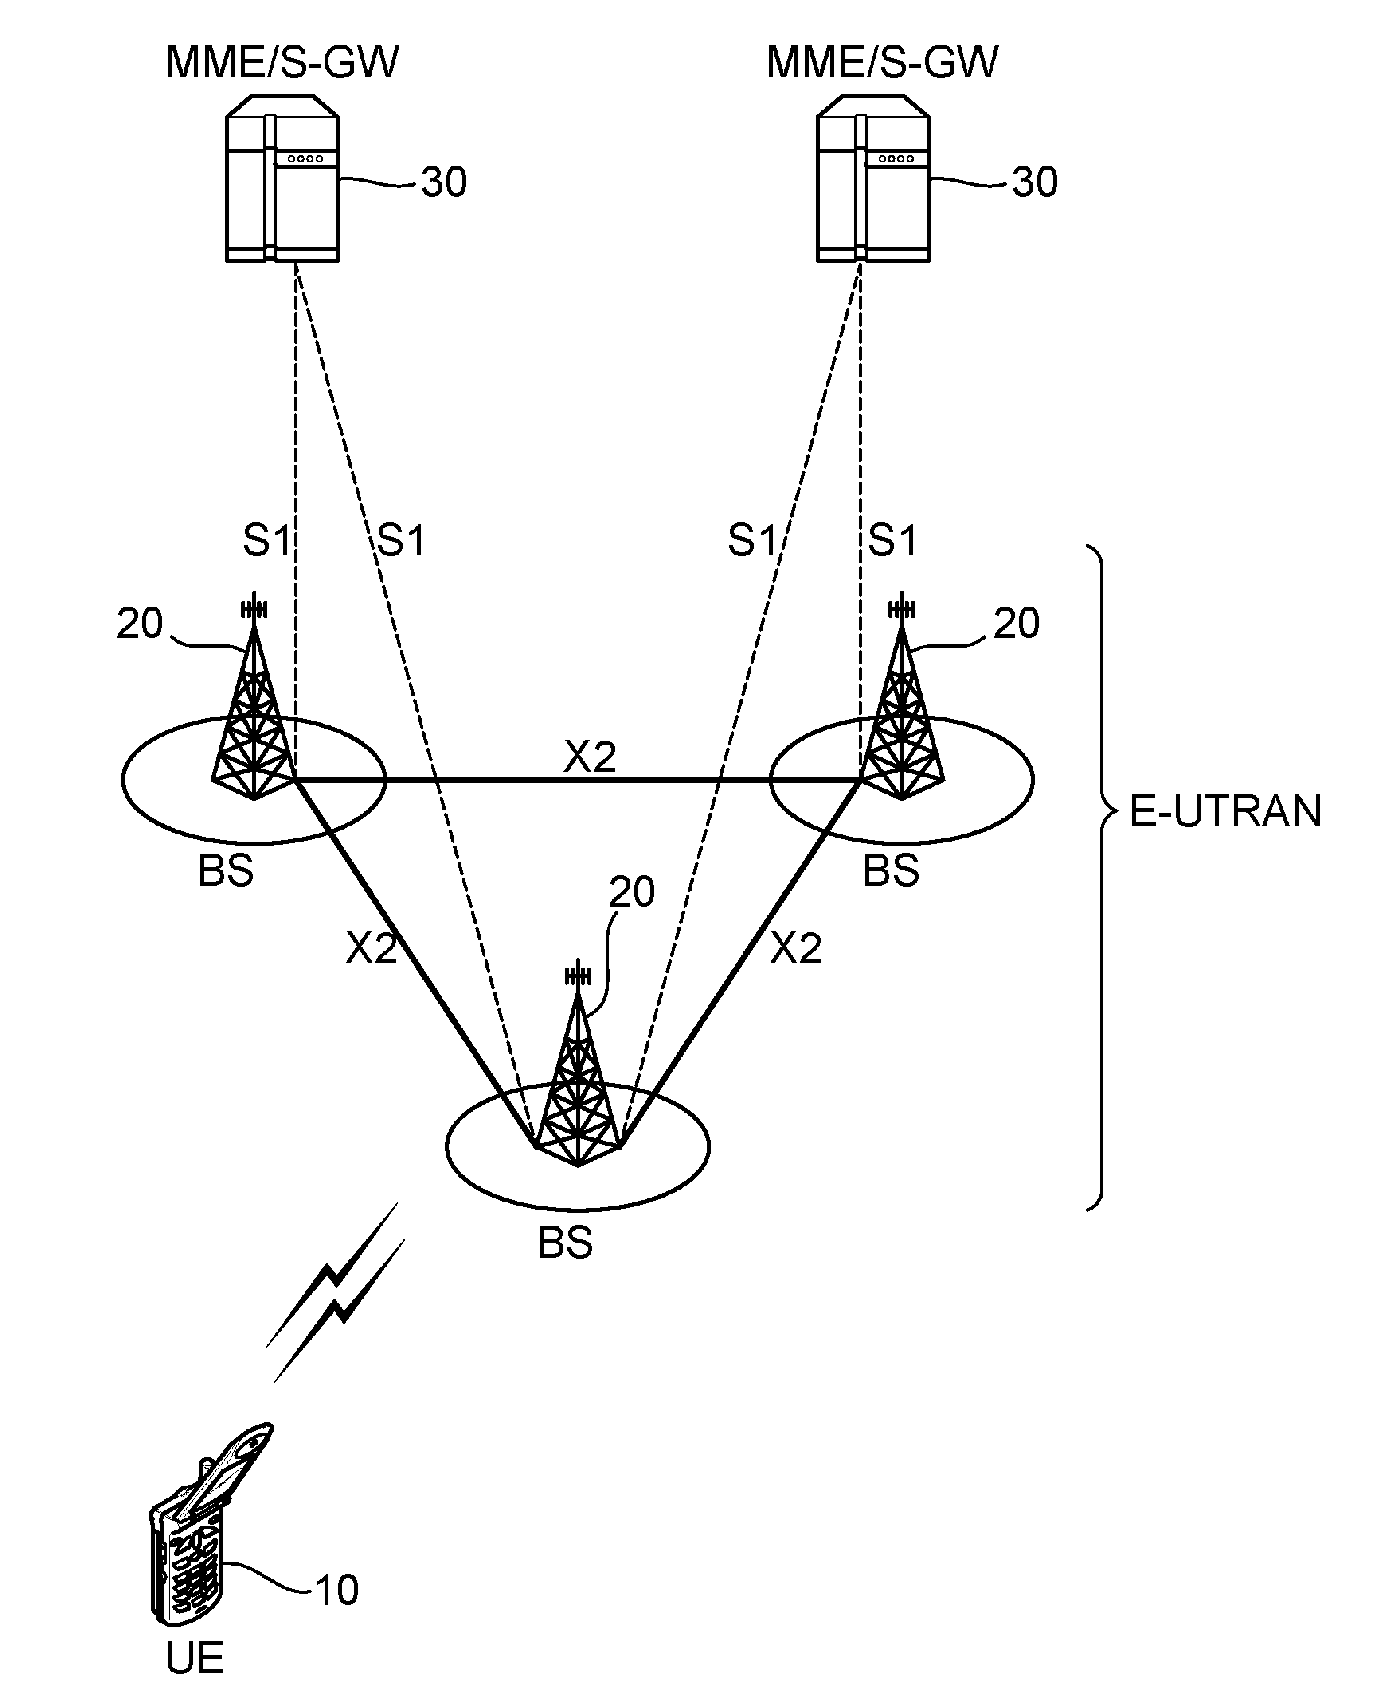 Method of performing cell reselection procedure in wireless communication system